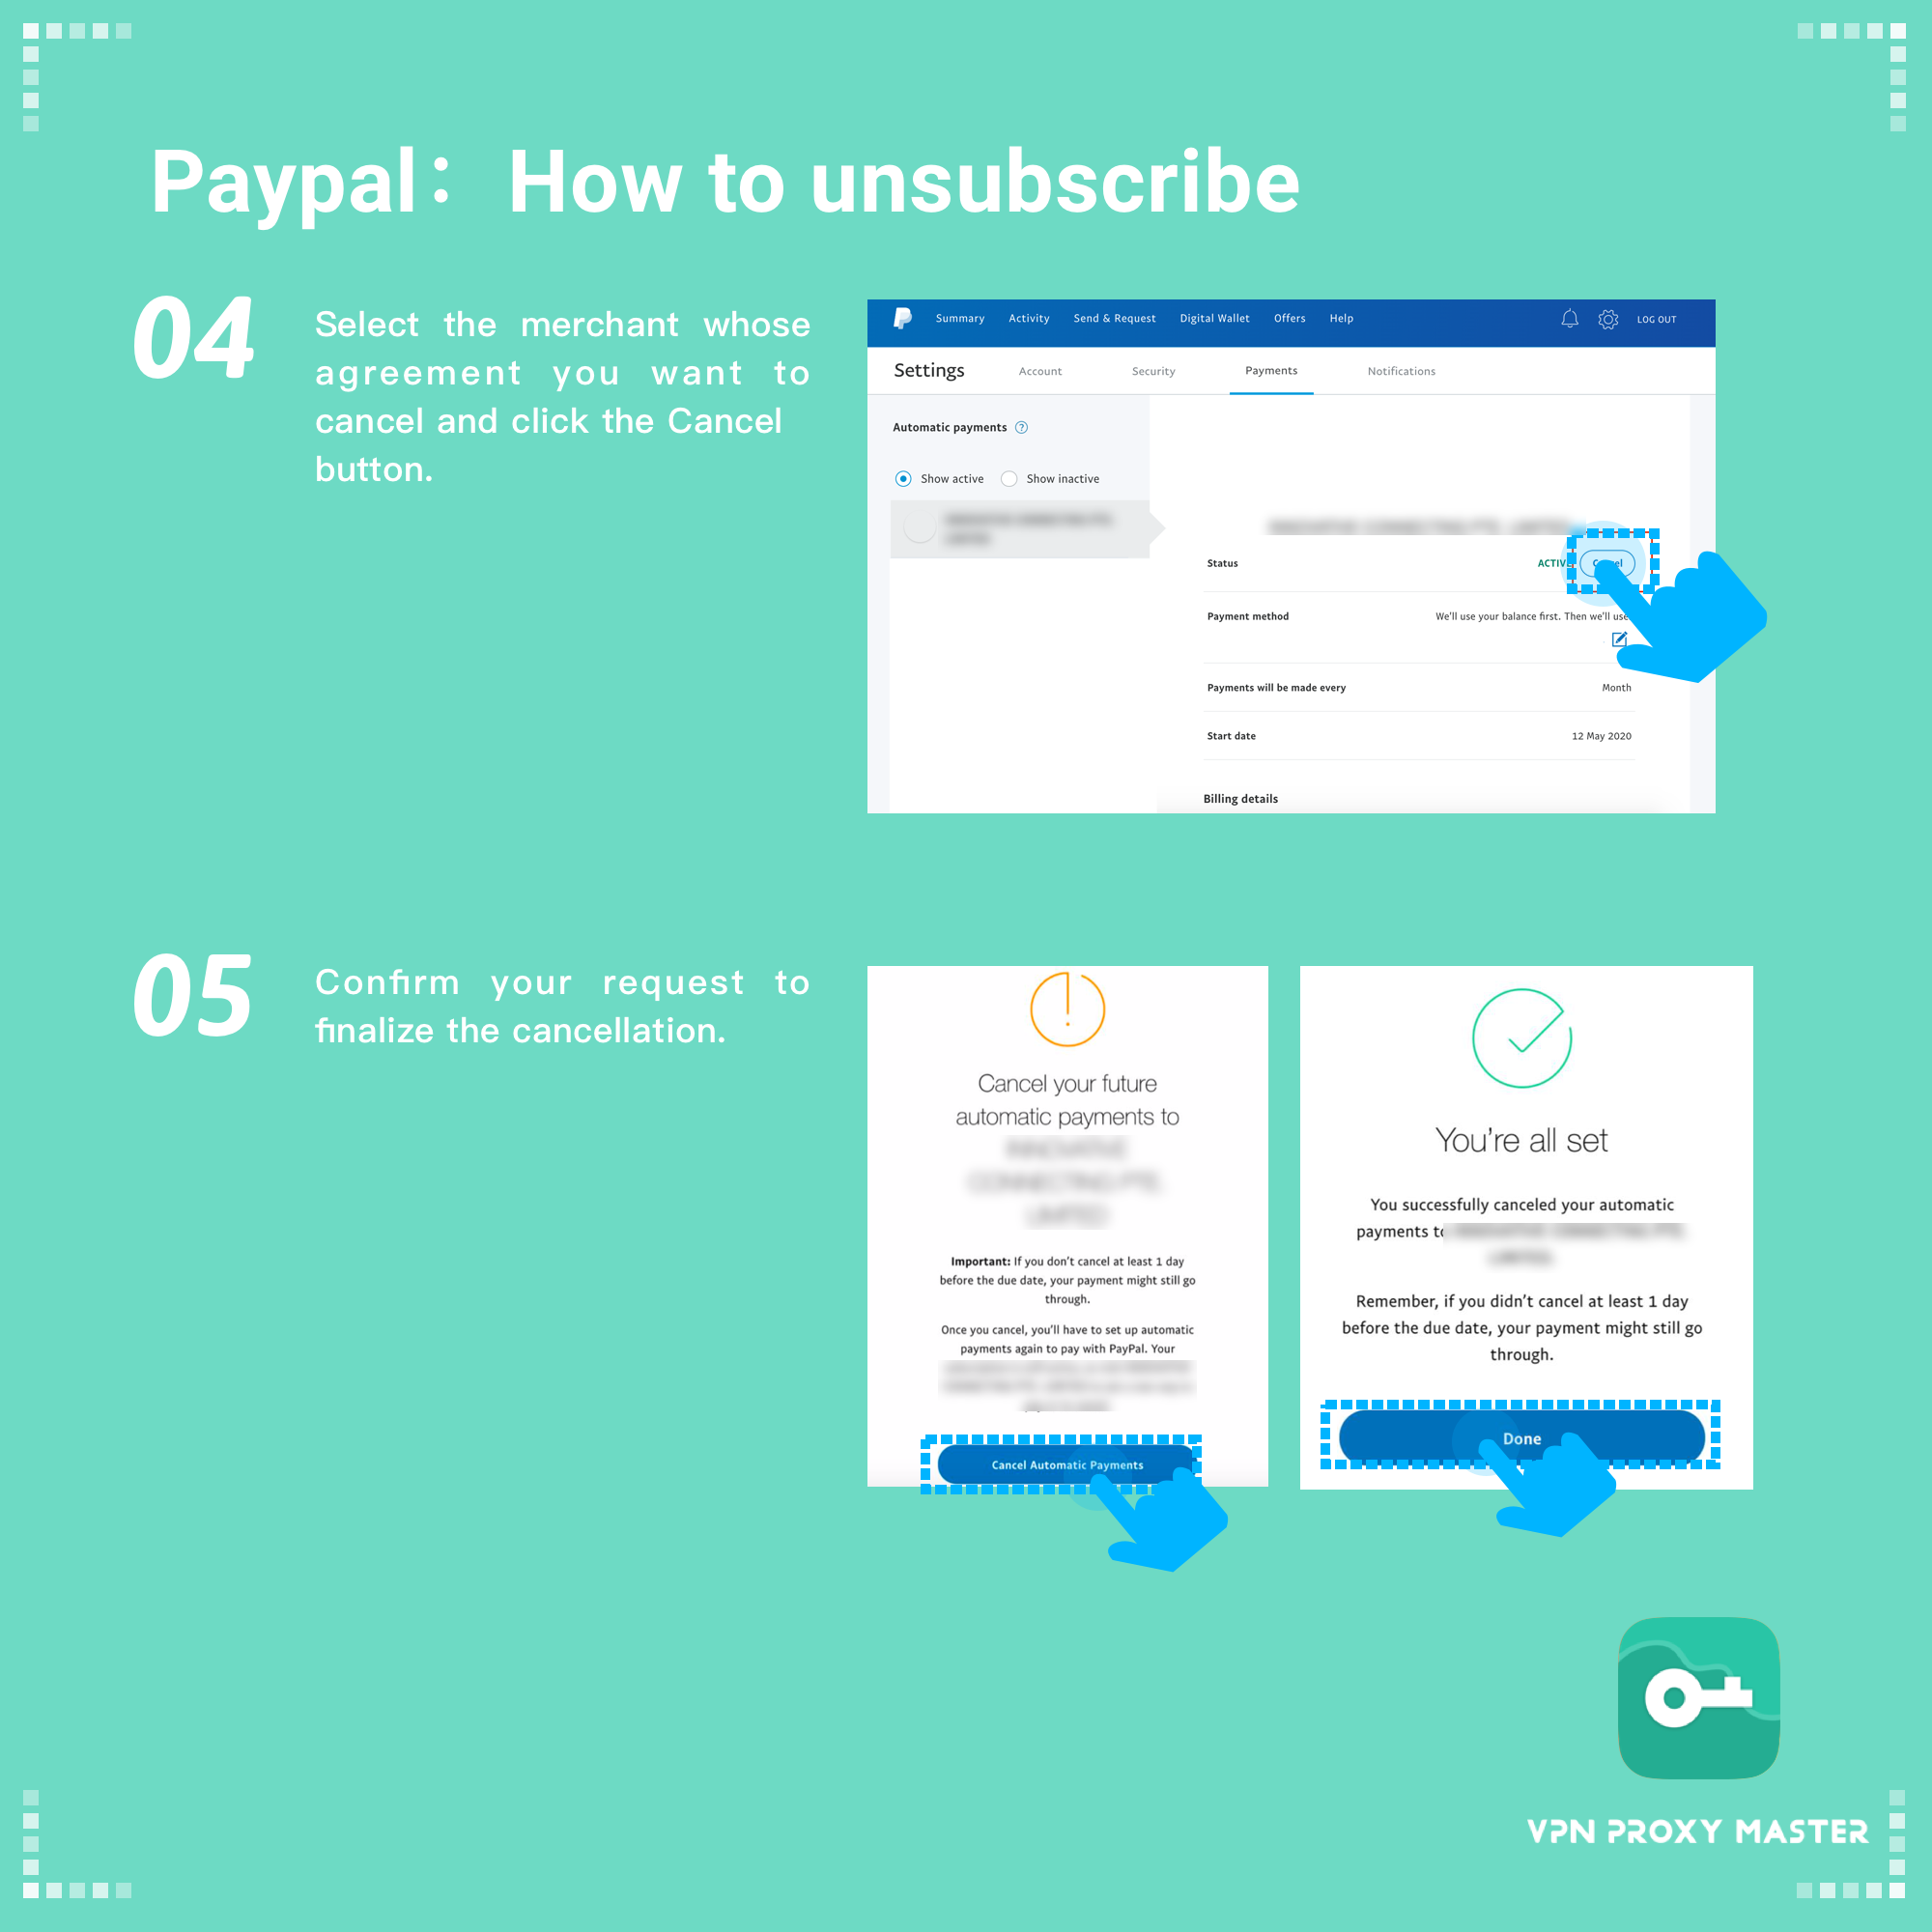 Paypal_How_to_unsubscribe2.png